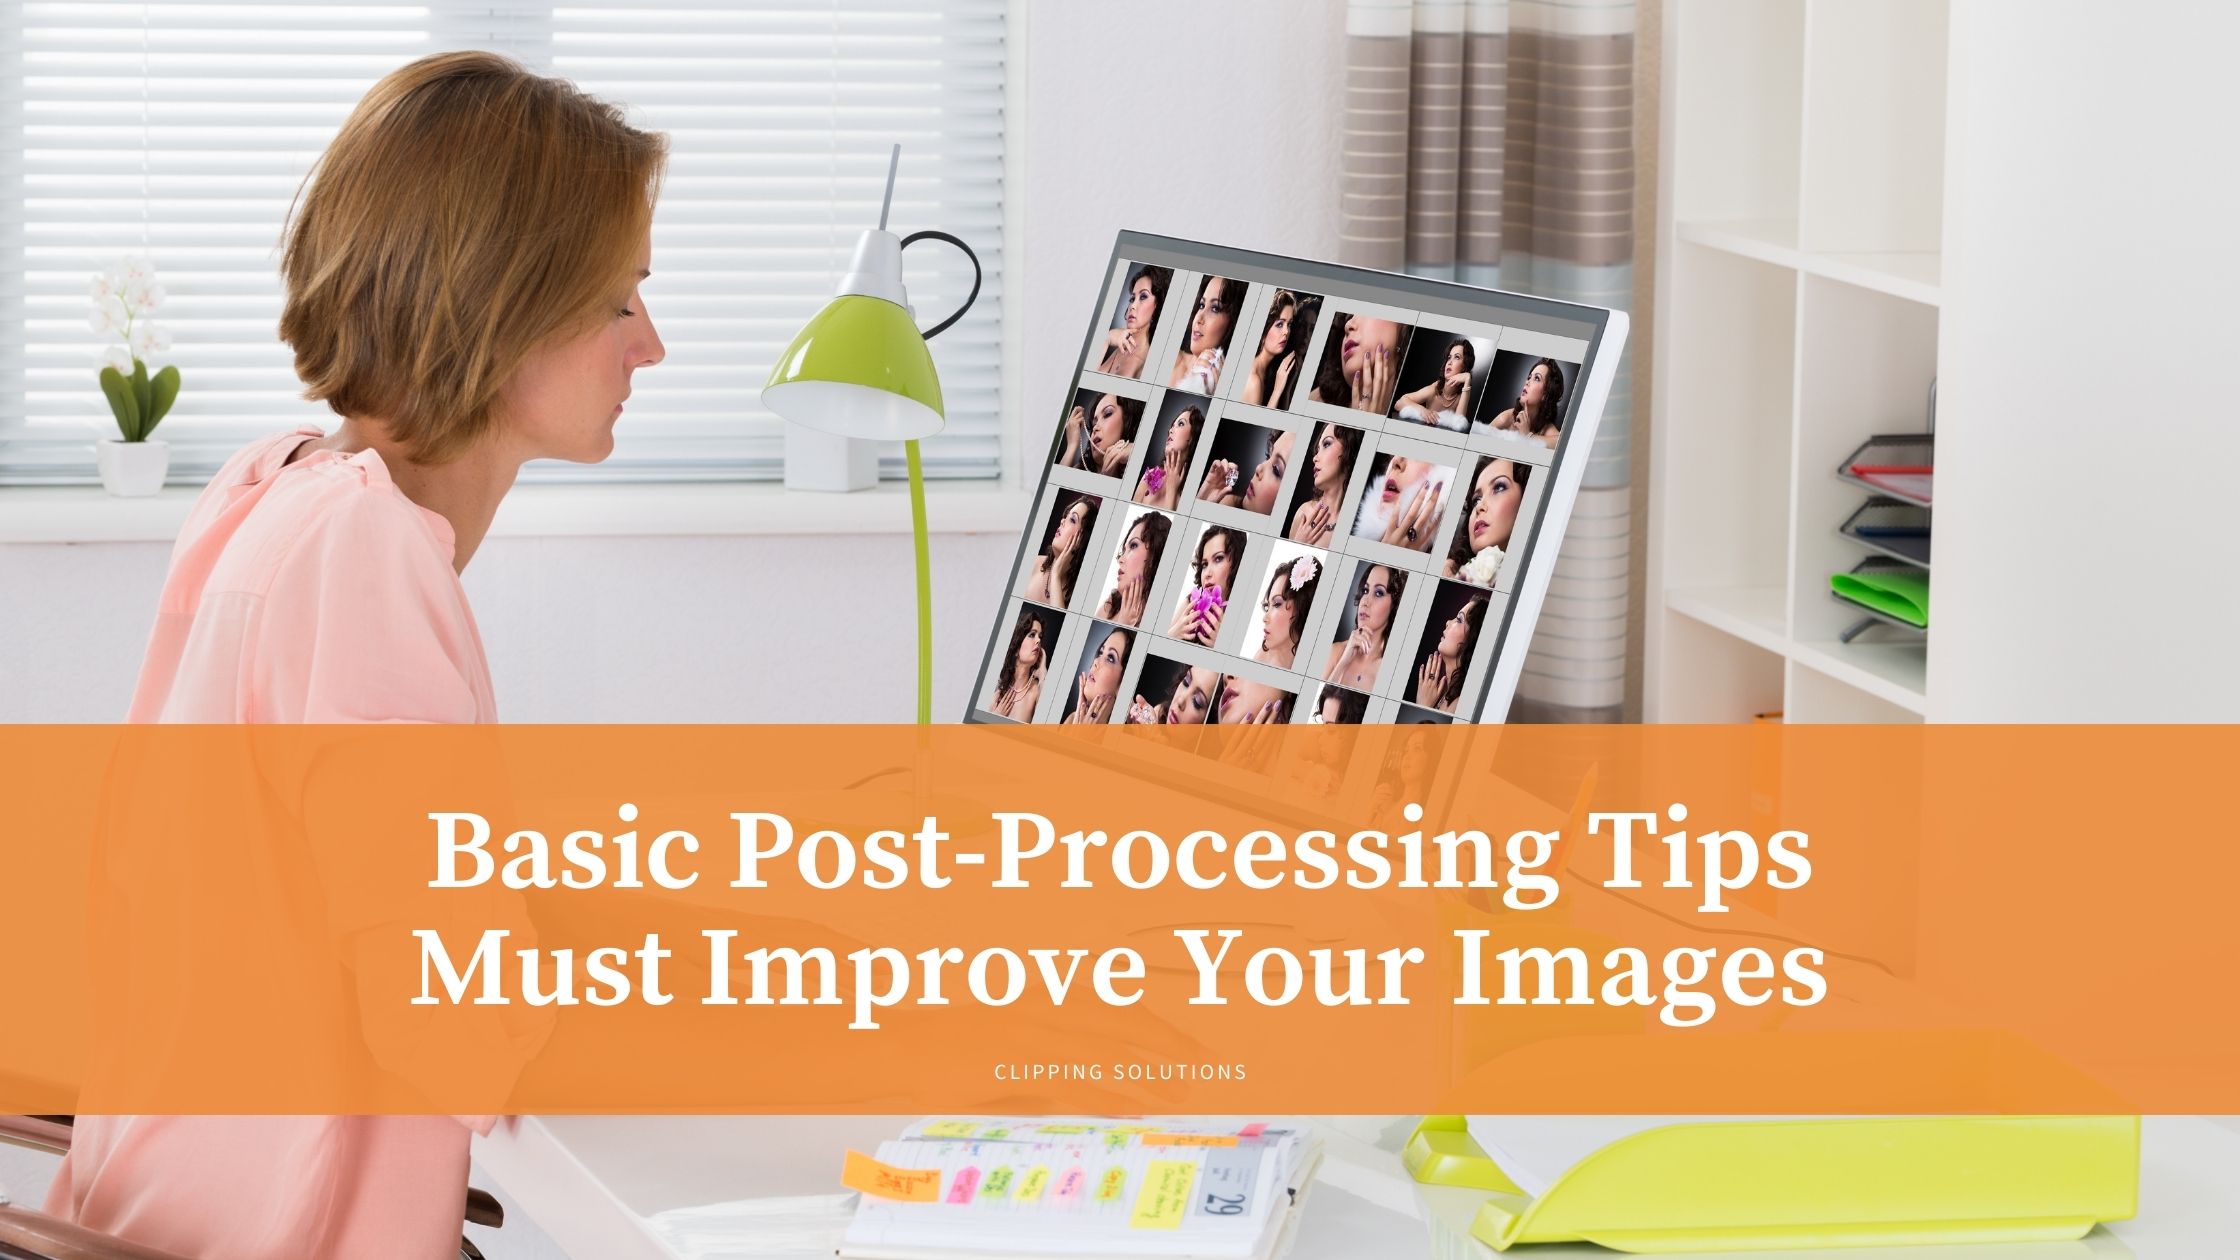 Basic Post-Processing Tips must Improve Your Images